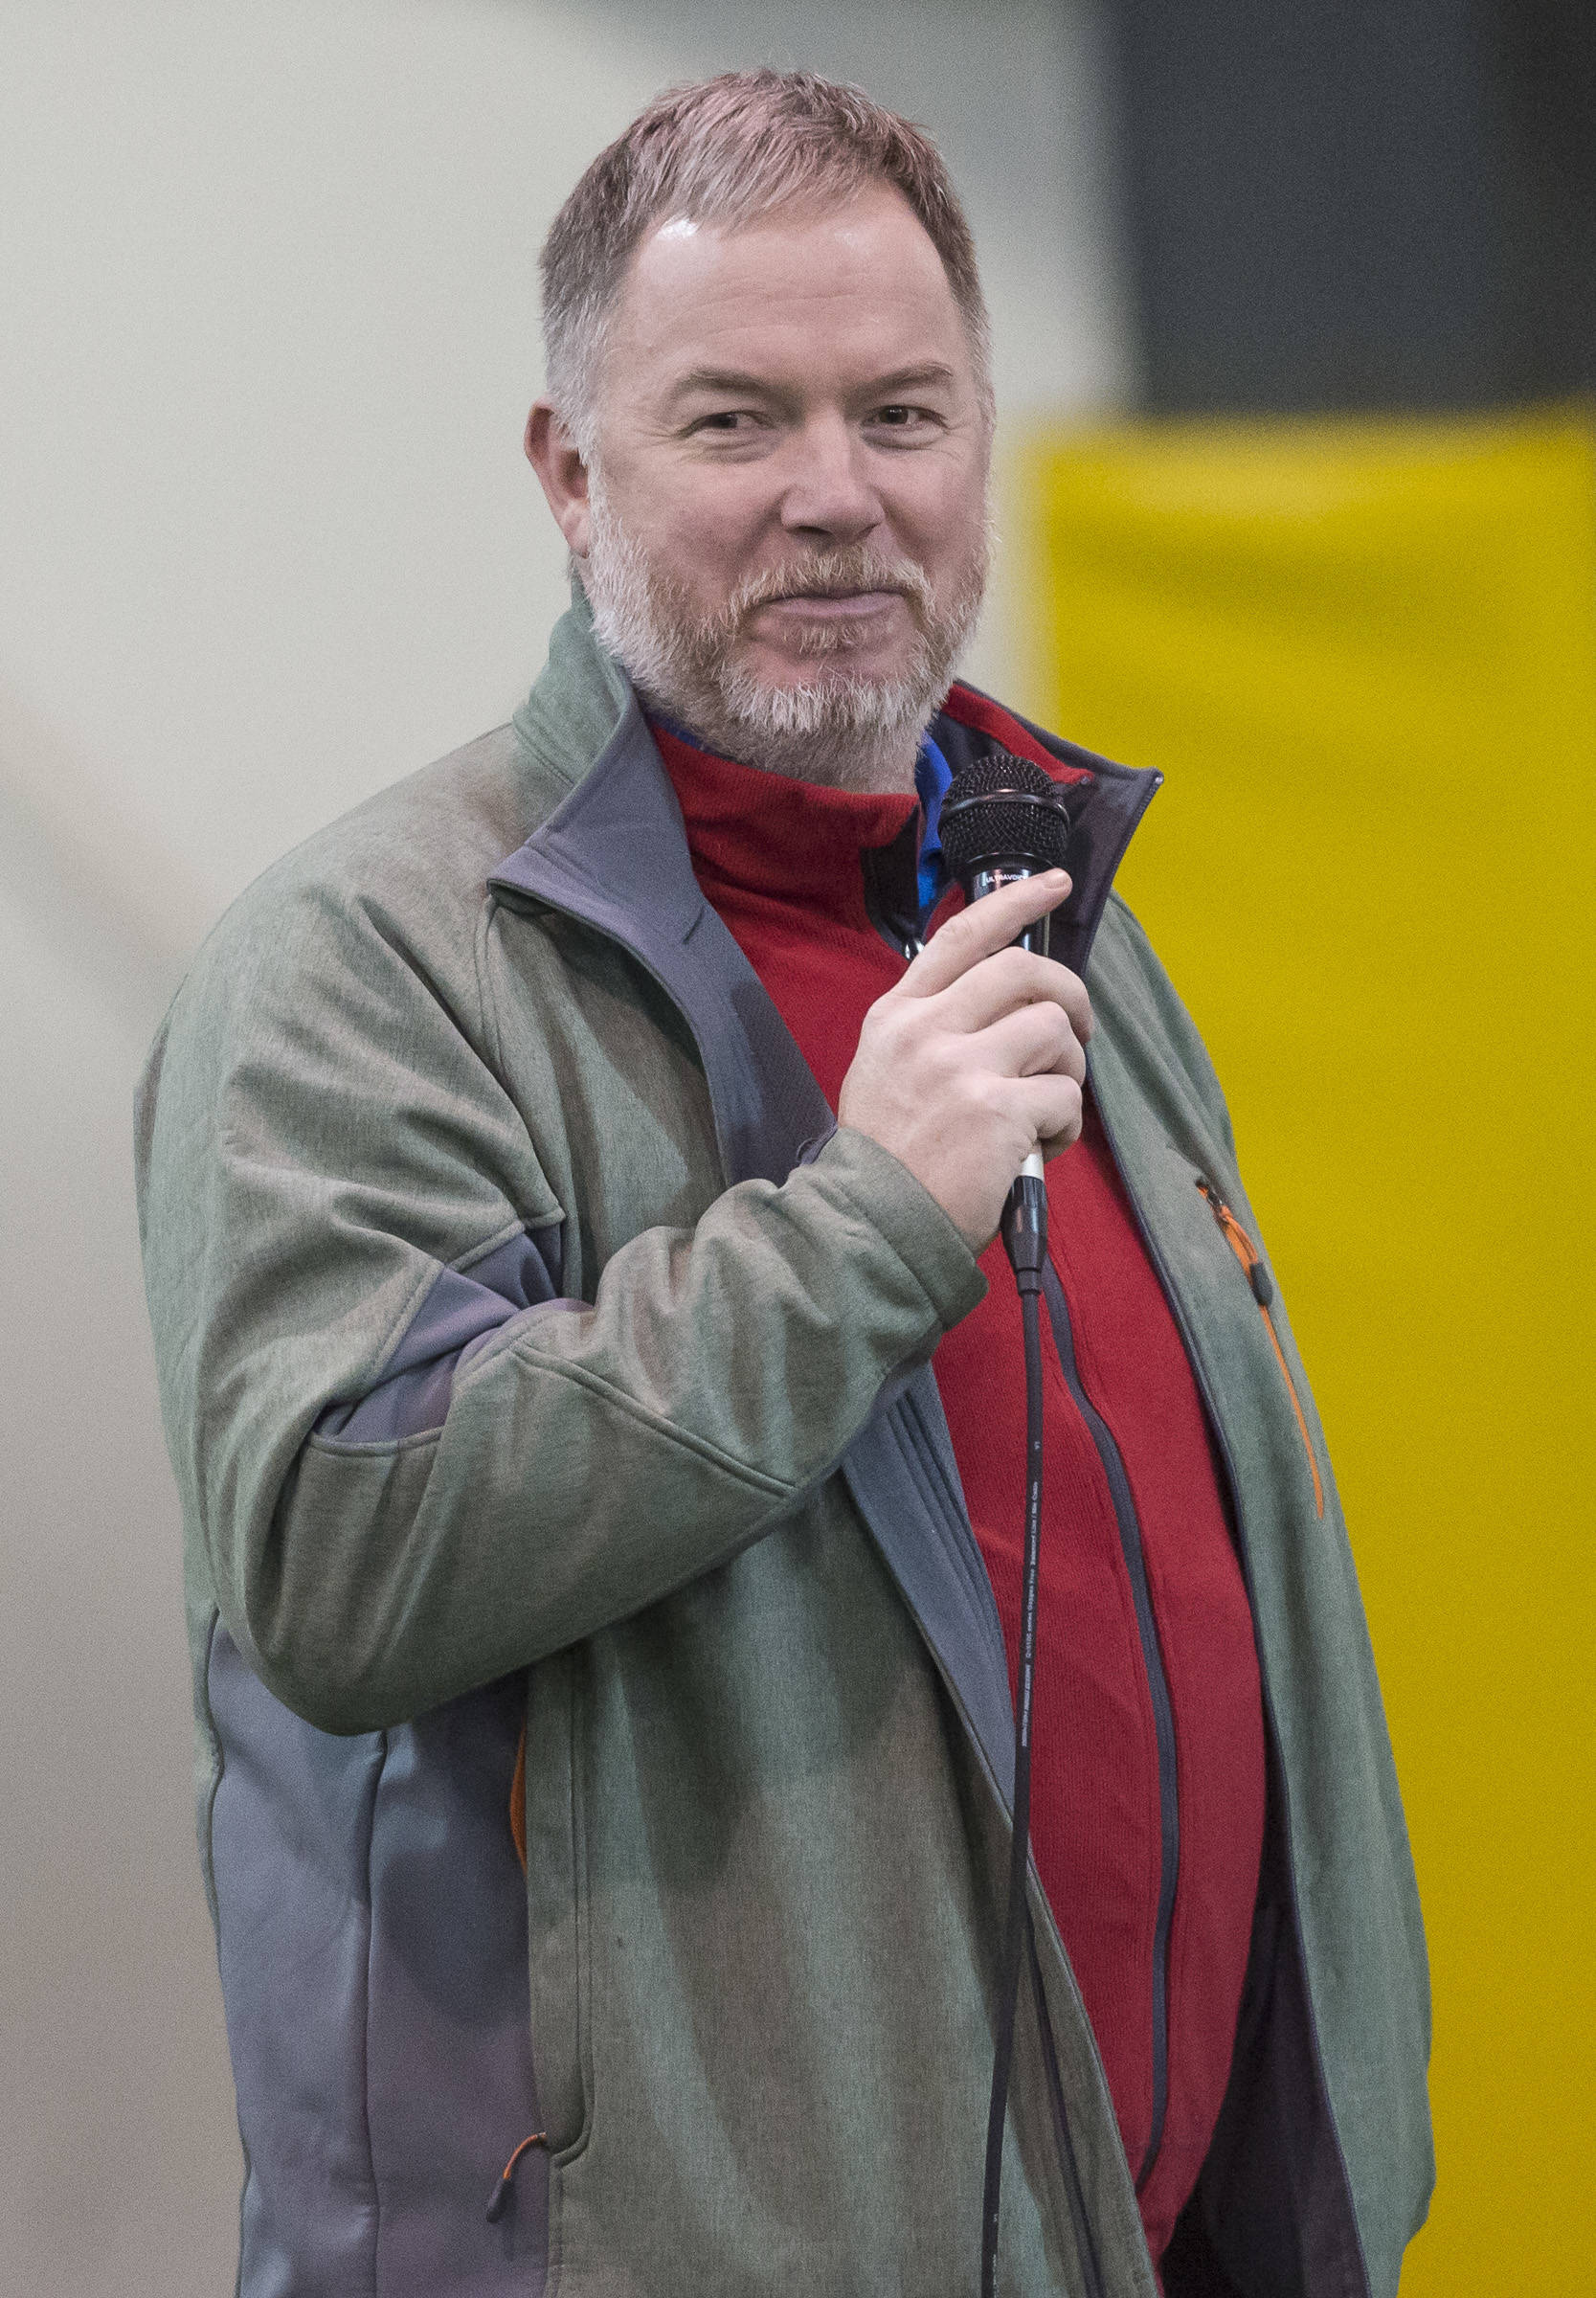 Marty McKeown, sponsor of the Juneau Holiday Cup since 2013, speaks at the annual Holiday Cup Soccer Tournament at the Wells Fargo Dimond Park Field House on Monday, Dec. 31, 2018. (Michael Penn | Juneau Empire)